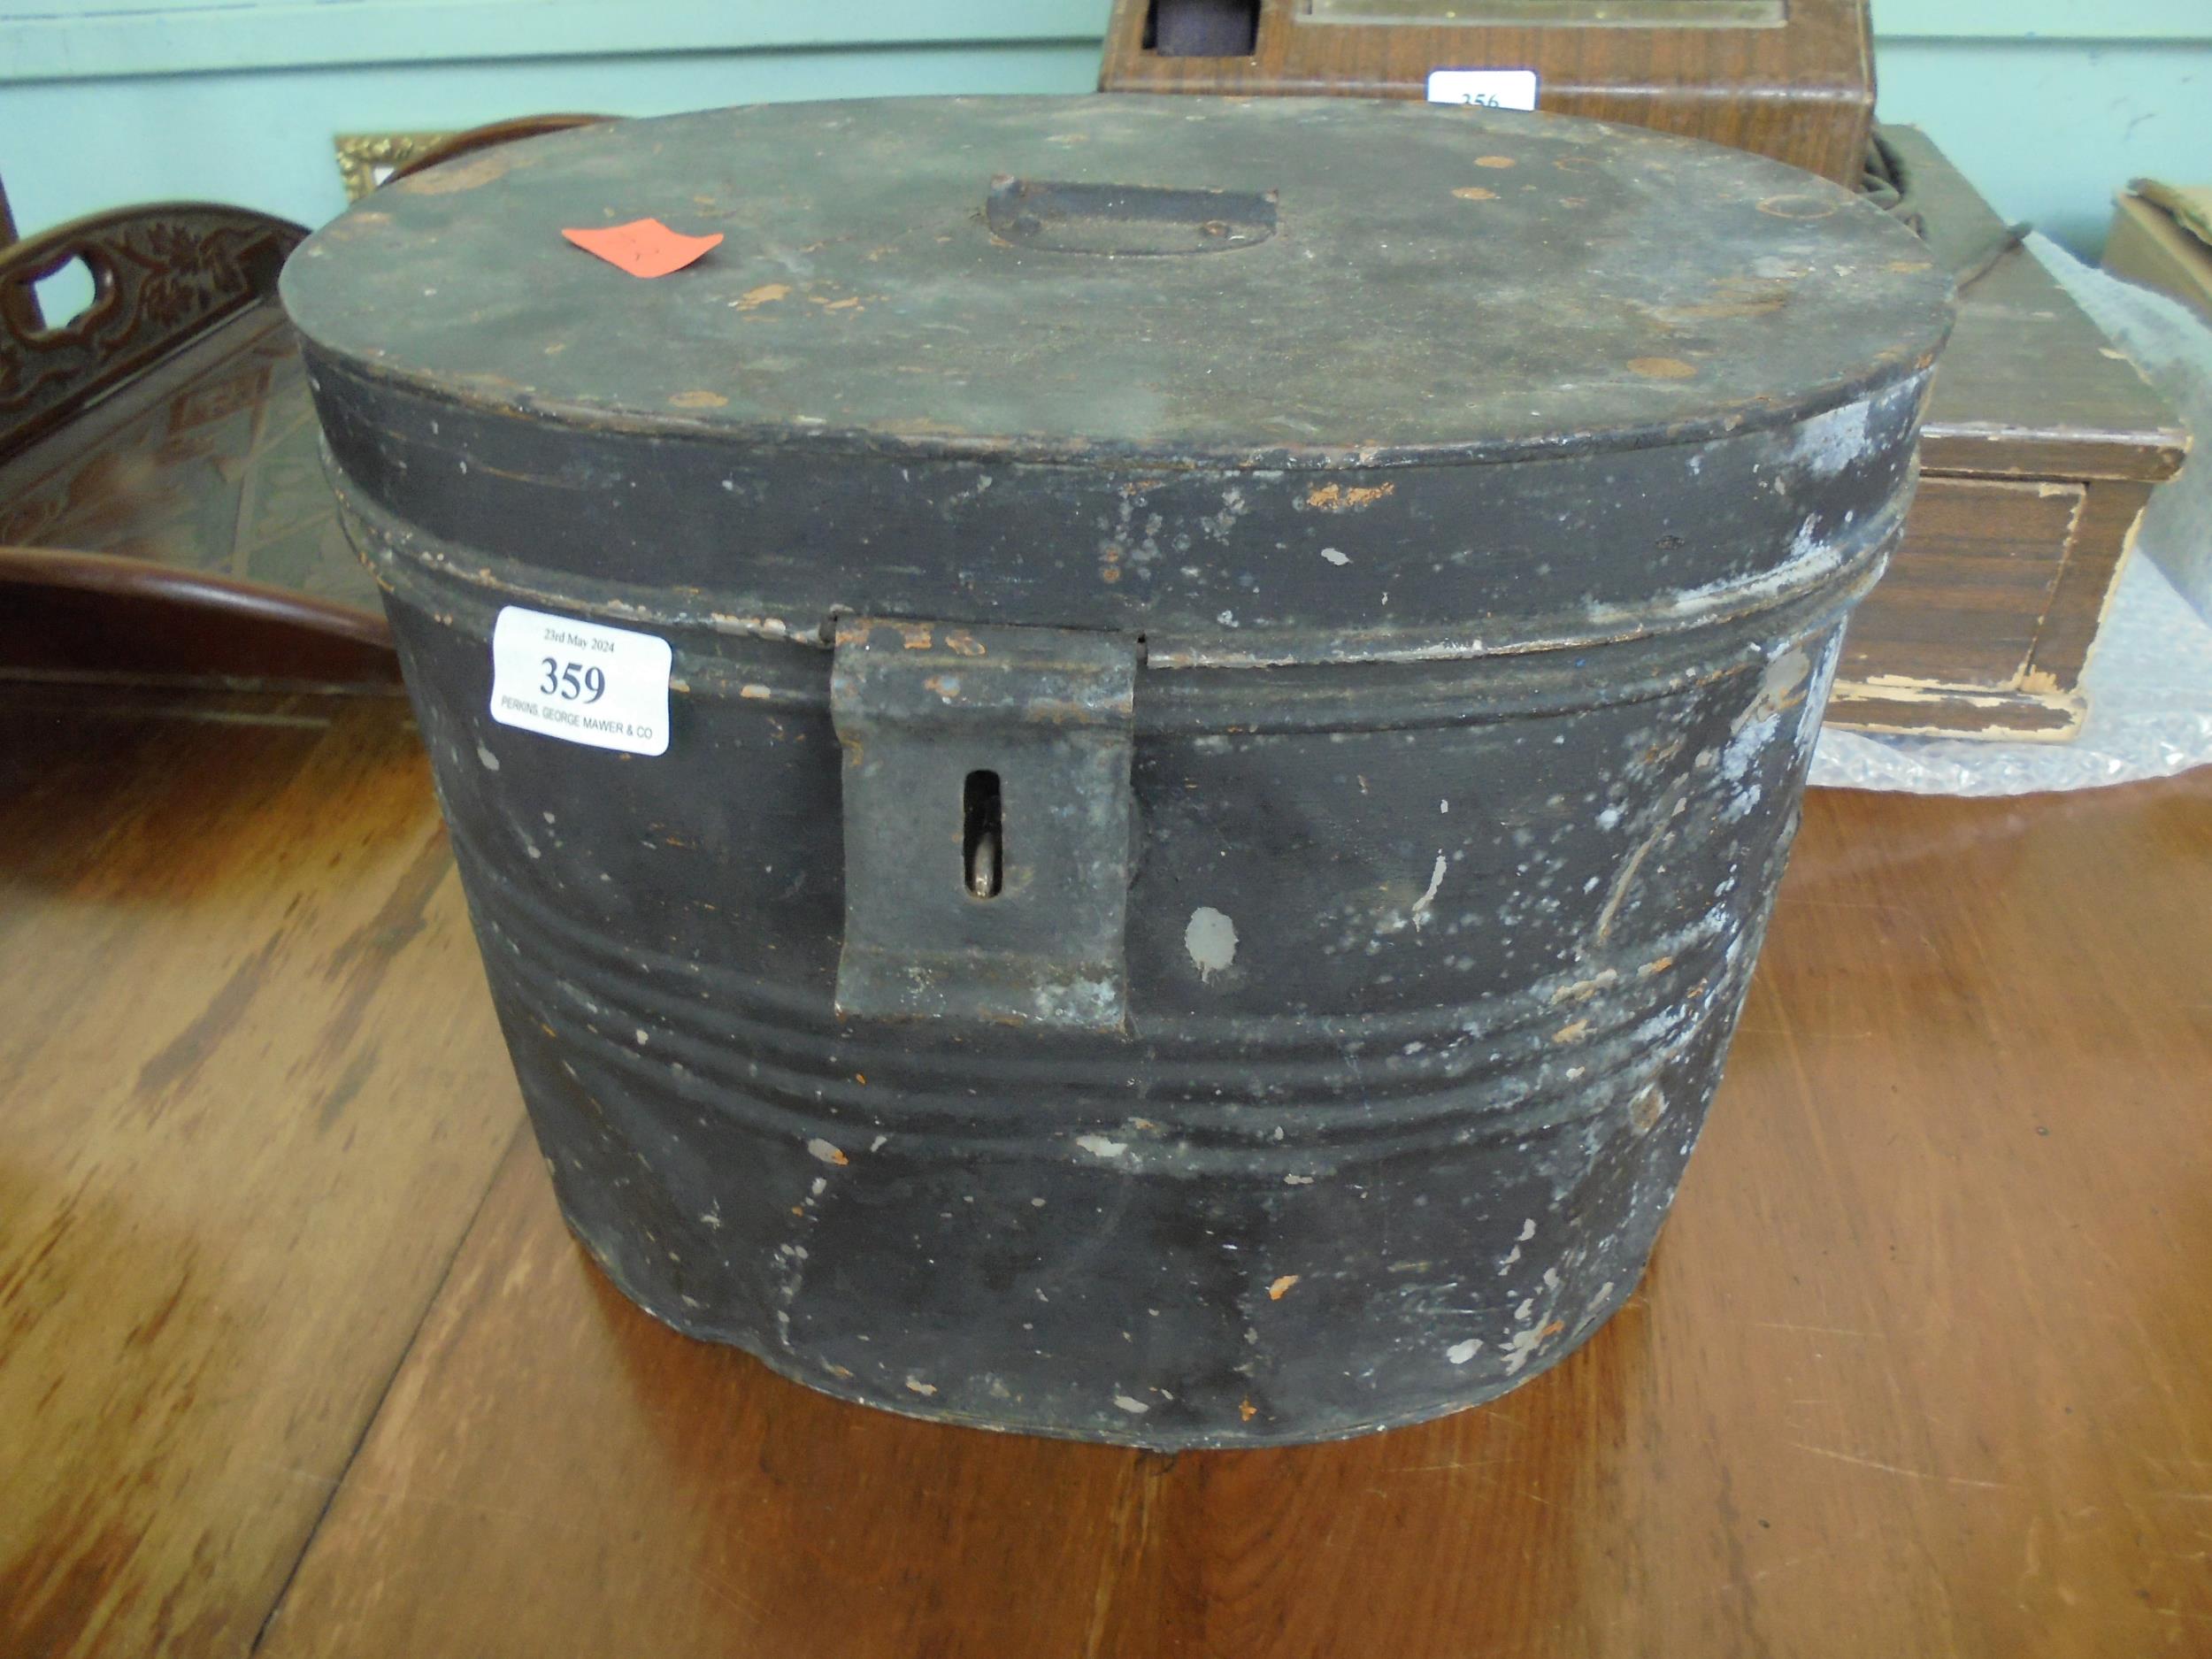 Metal hat box containing 2 bowler hats